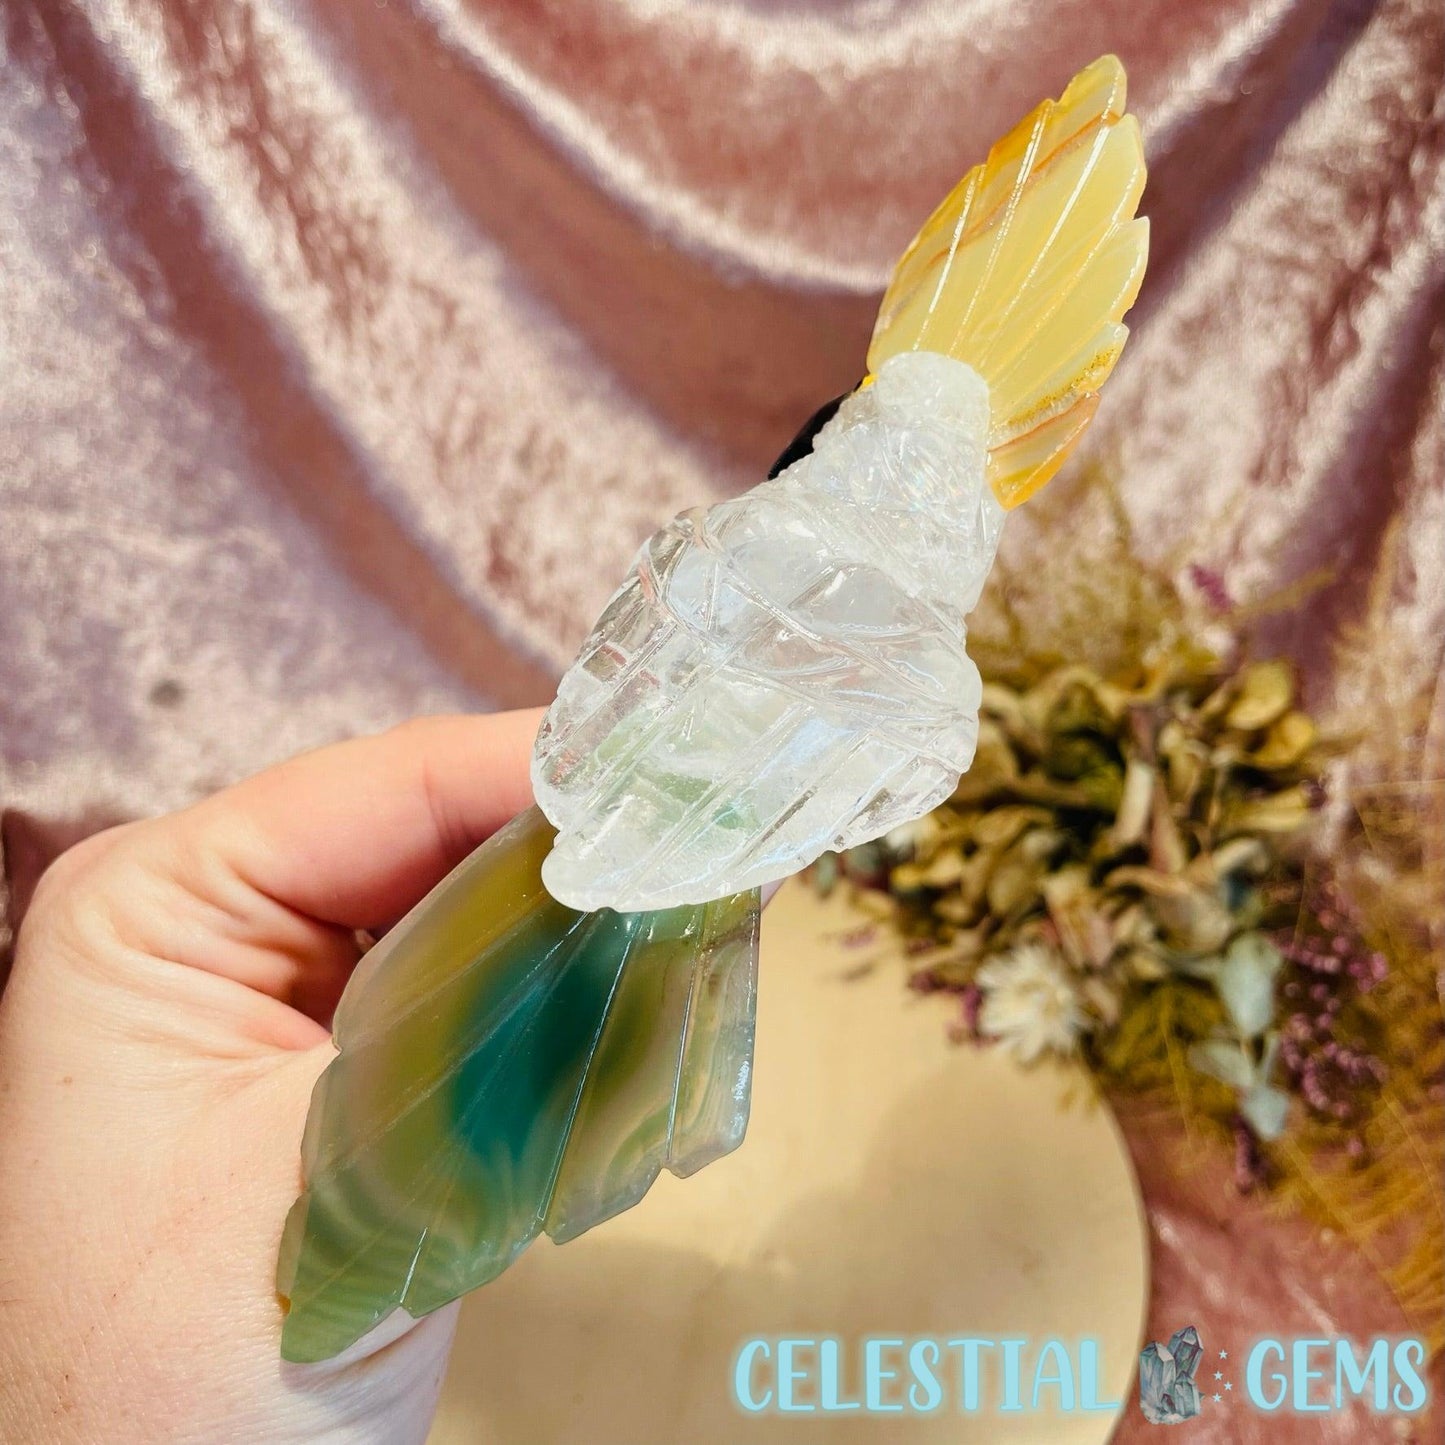 Clear Quartz, Green & Yellow Agate Parrot Bird Medium Carving for Crystal Cave Perch